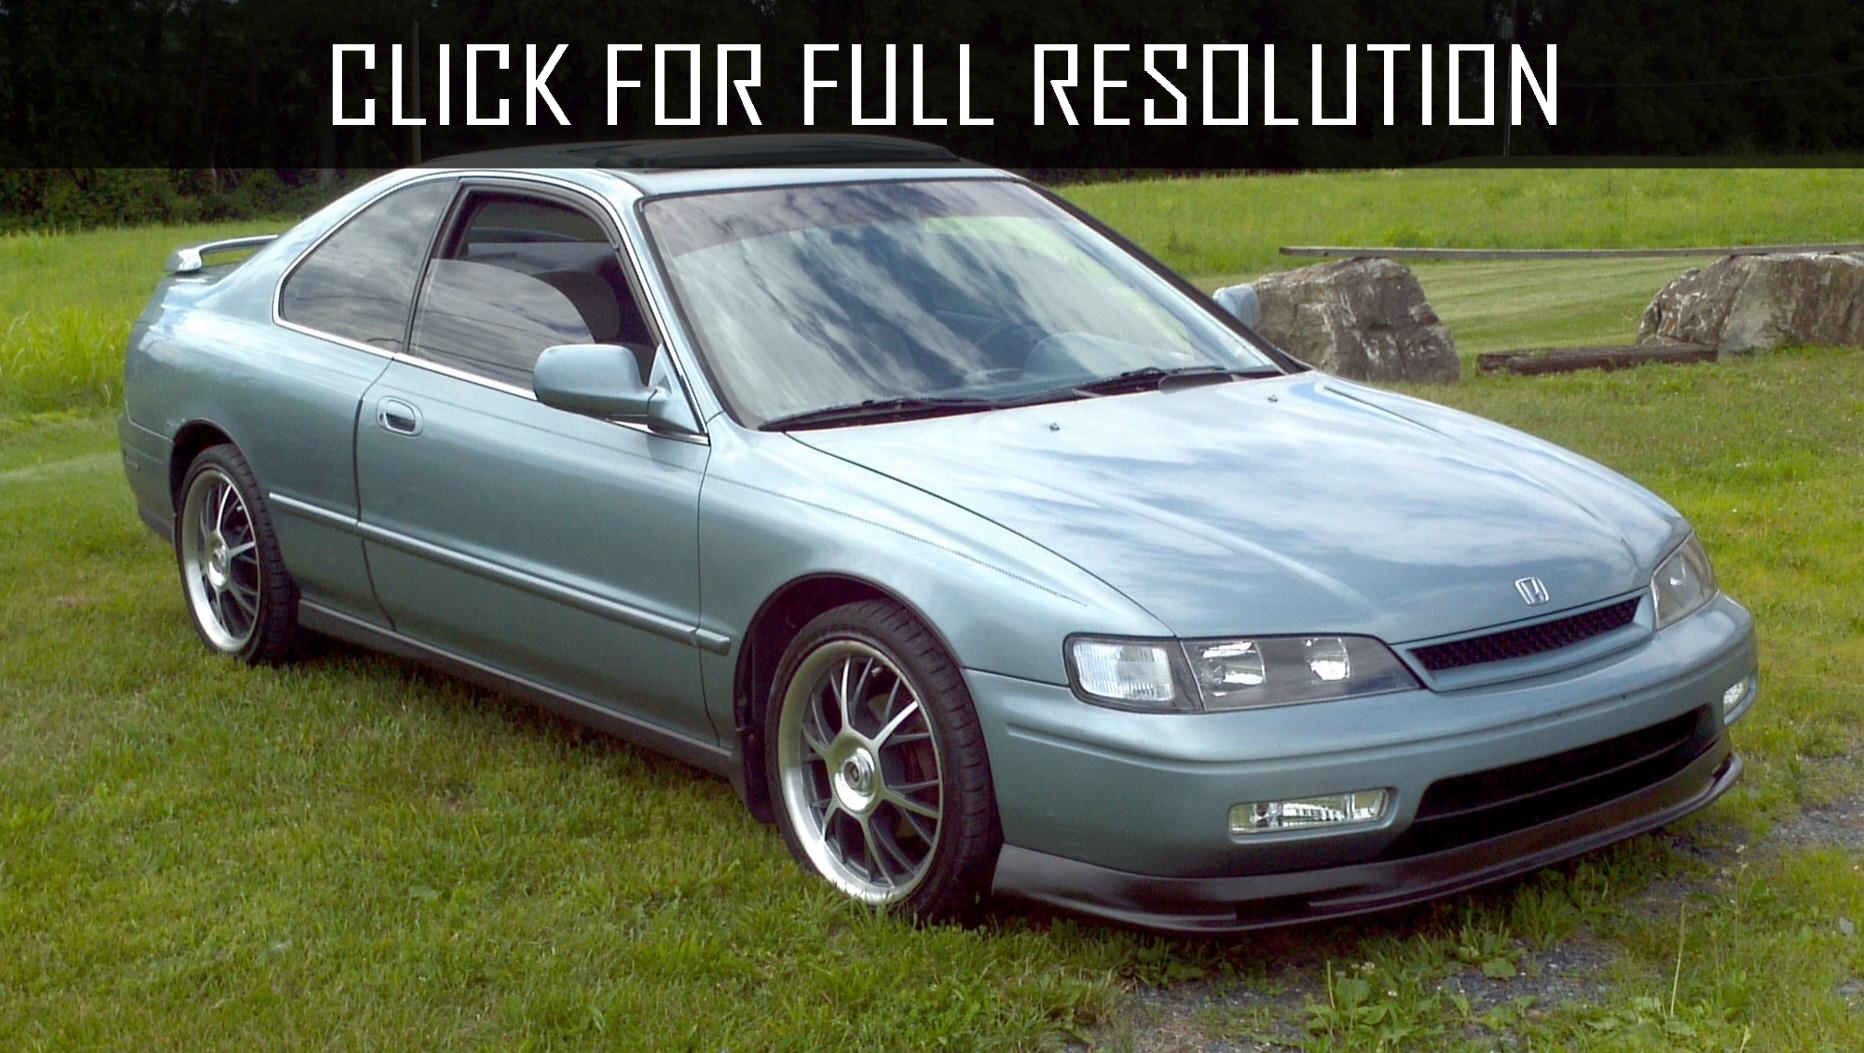 Honda Accord 1995 Reviews Prices Ratings With Various Photos